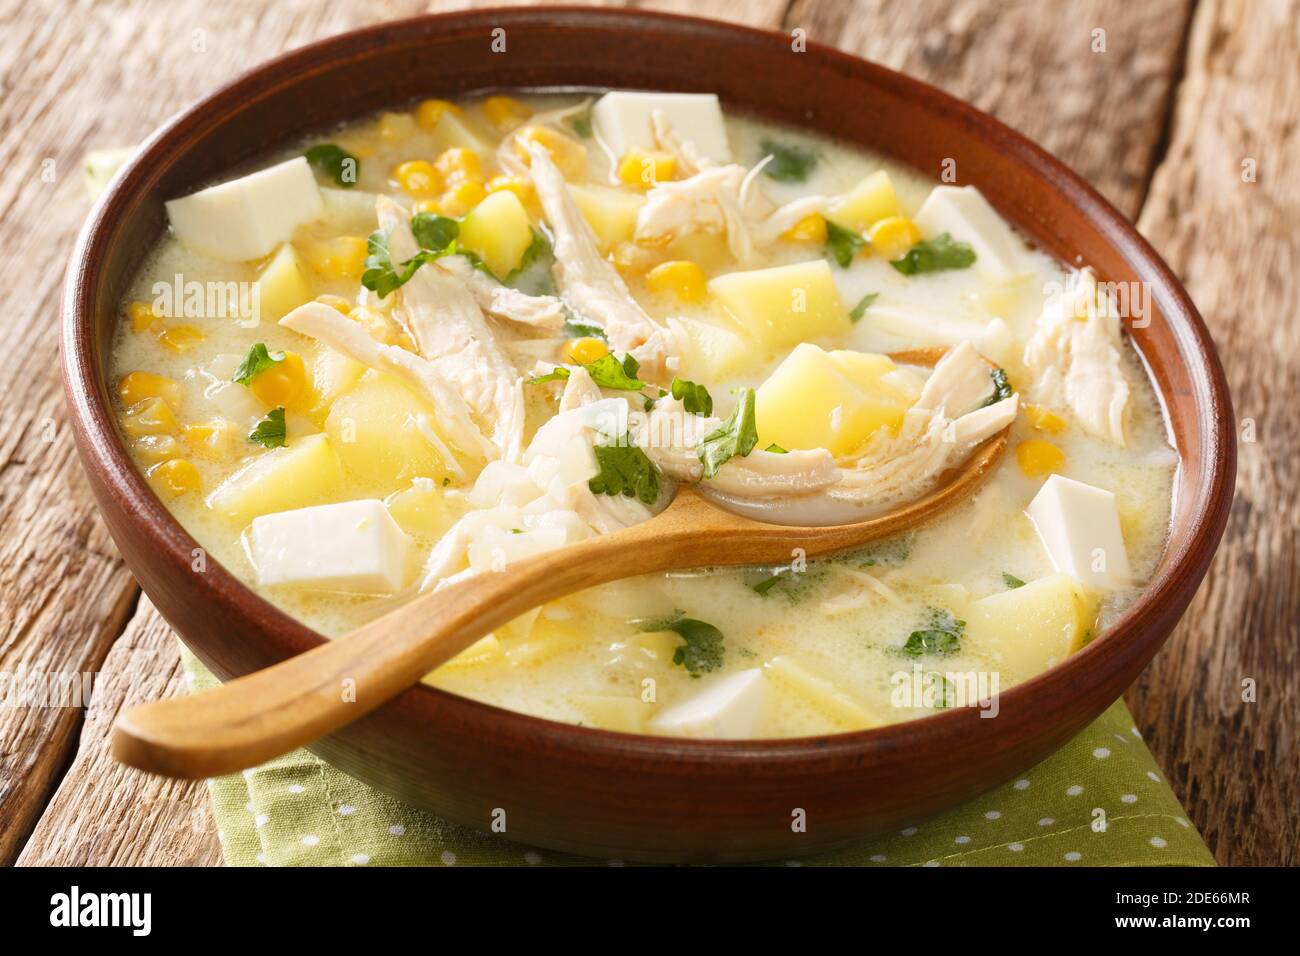 Chupe andino refers to various stews and soups that are prepared in the Andes mountains region in South America close-up in a bowl on the table. horiz Stock Photo